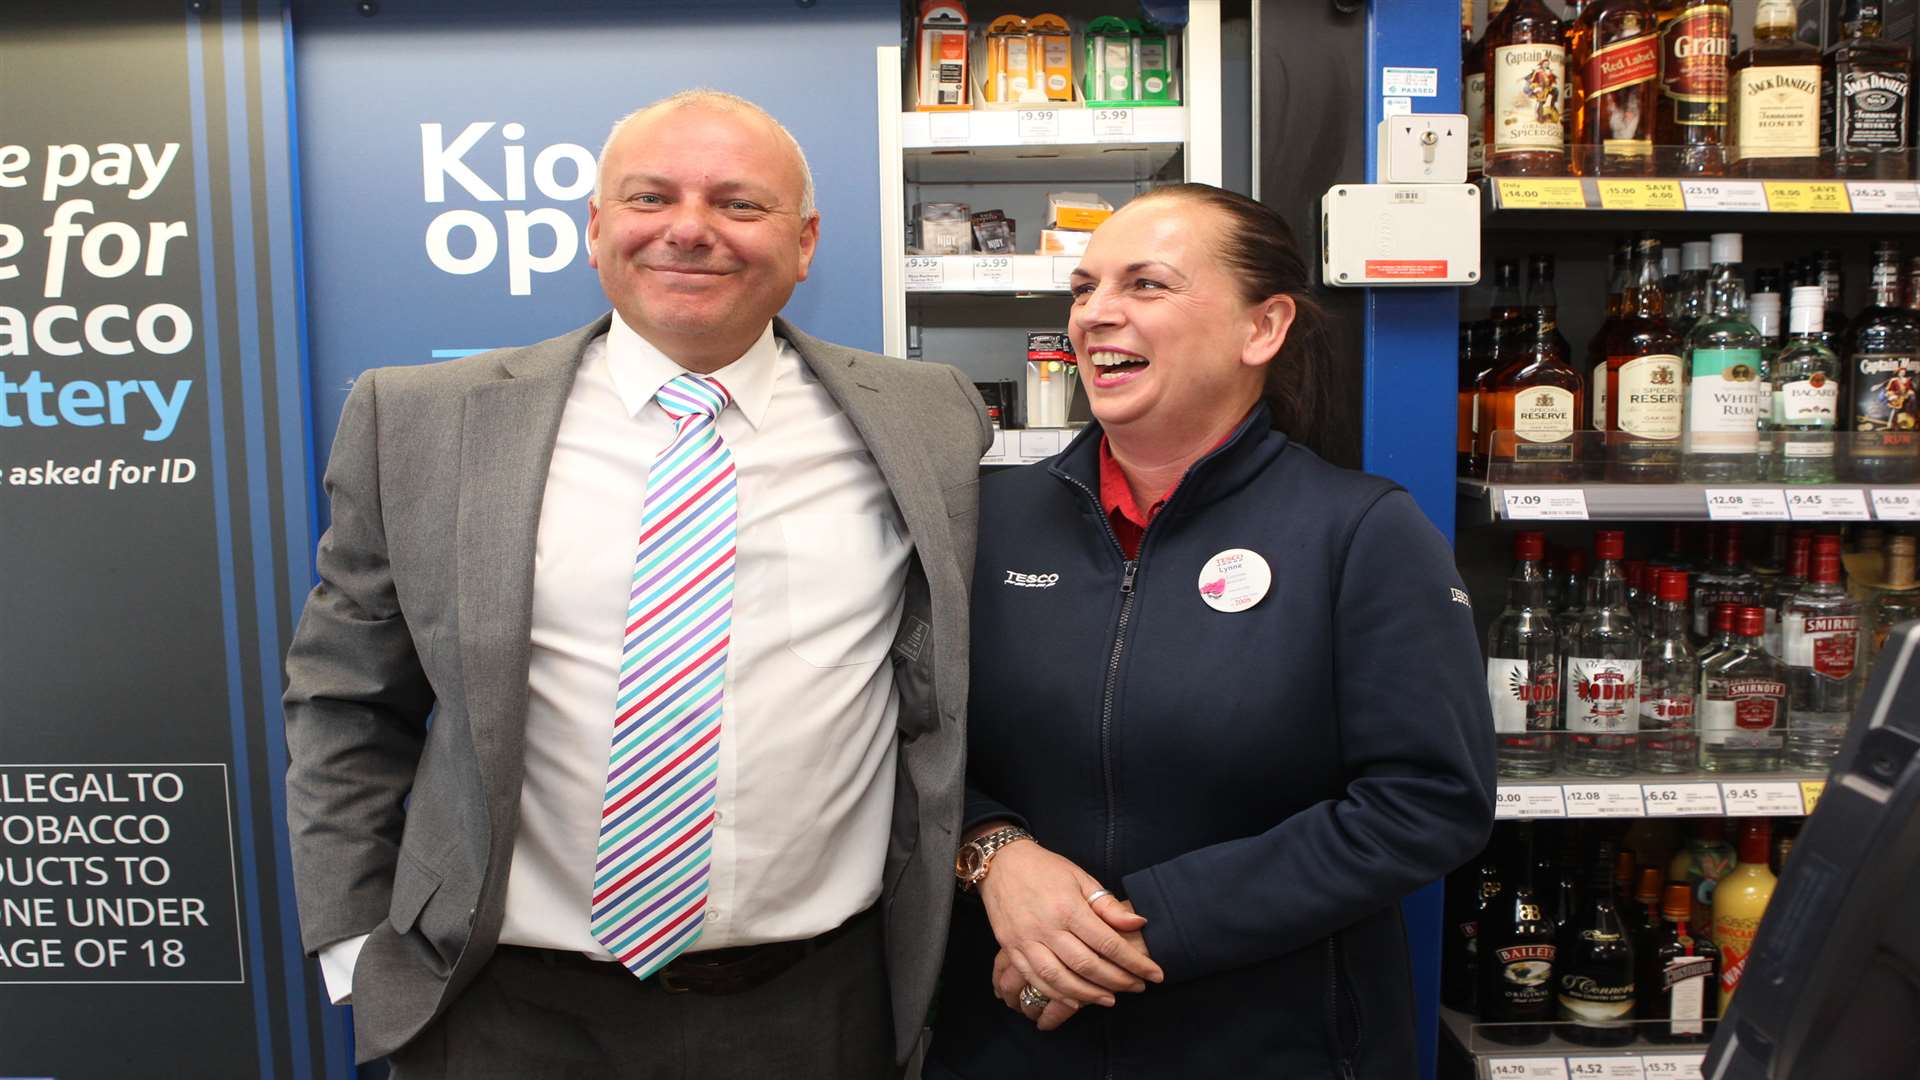 Store manager Brian Mynott says he's proud to have Lynne as part of his team